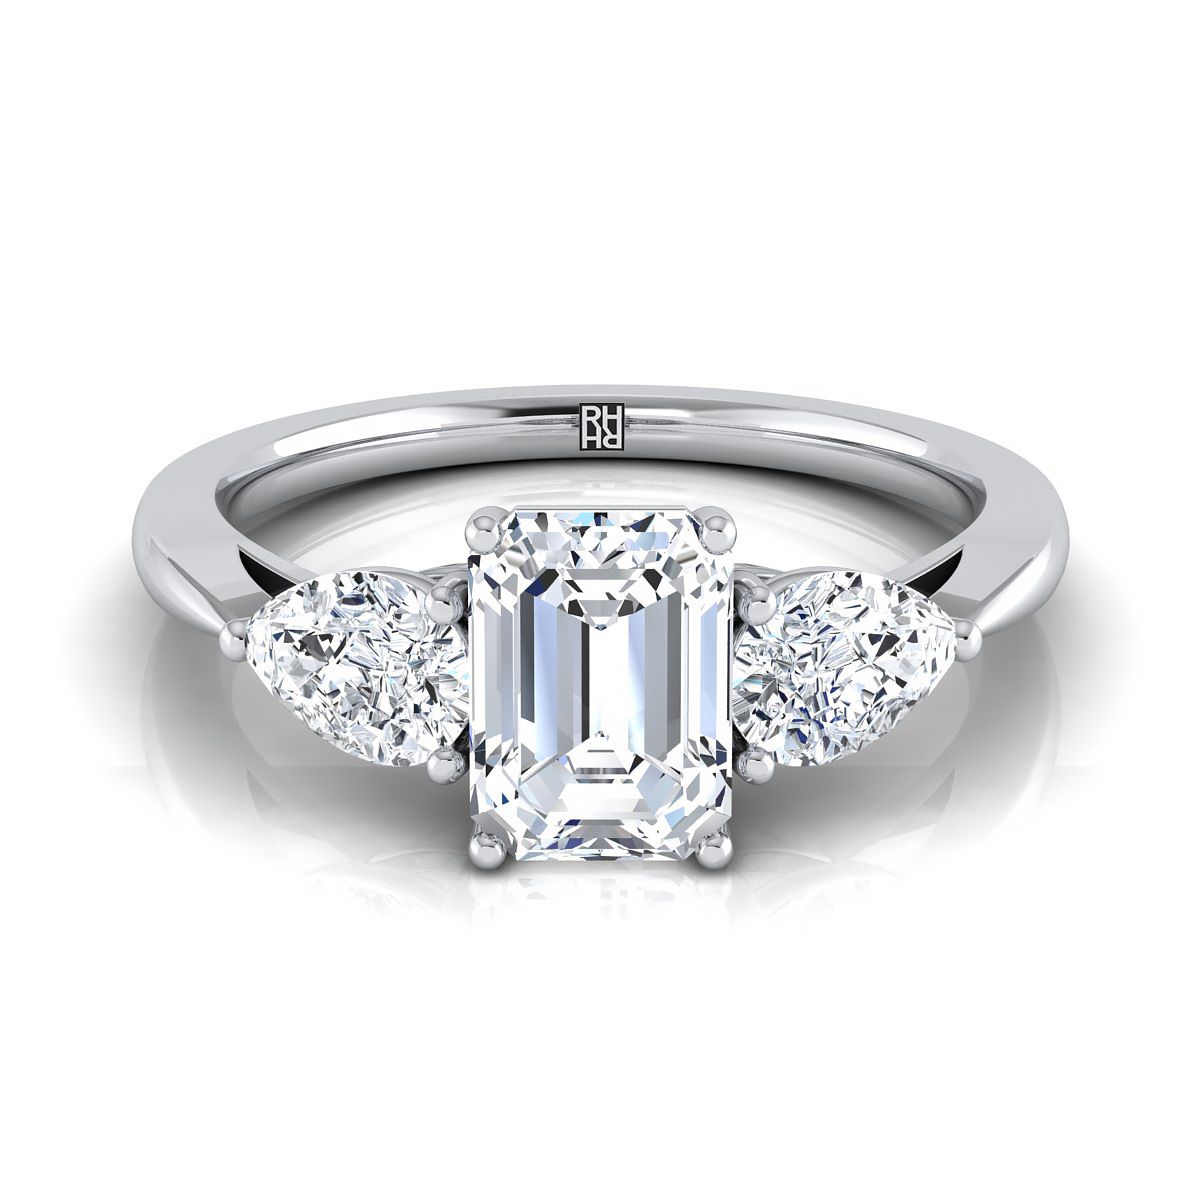 18K White Gold Emerald Cut Diamond Perfectly Matched Pear Shaped Three Diamond Engagement Ring -7/8ctw